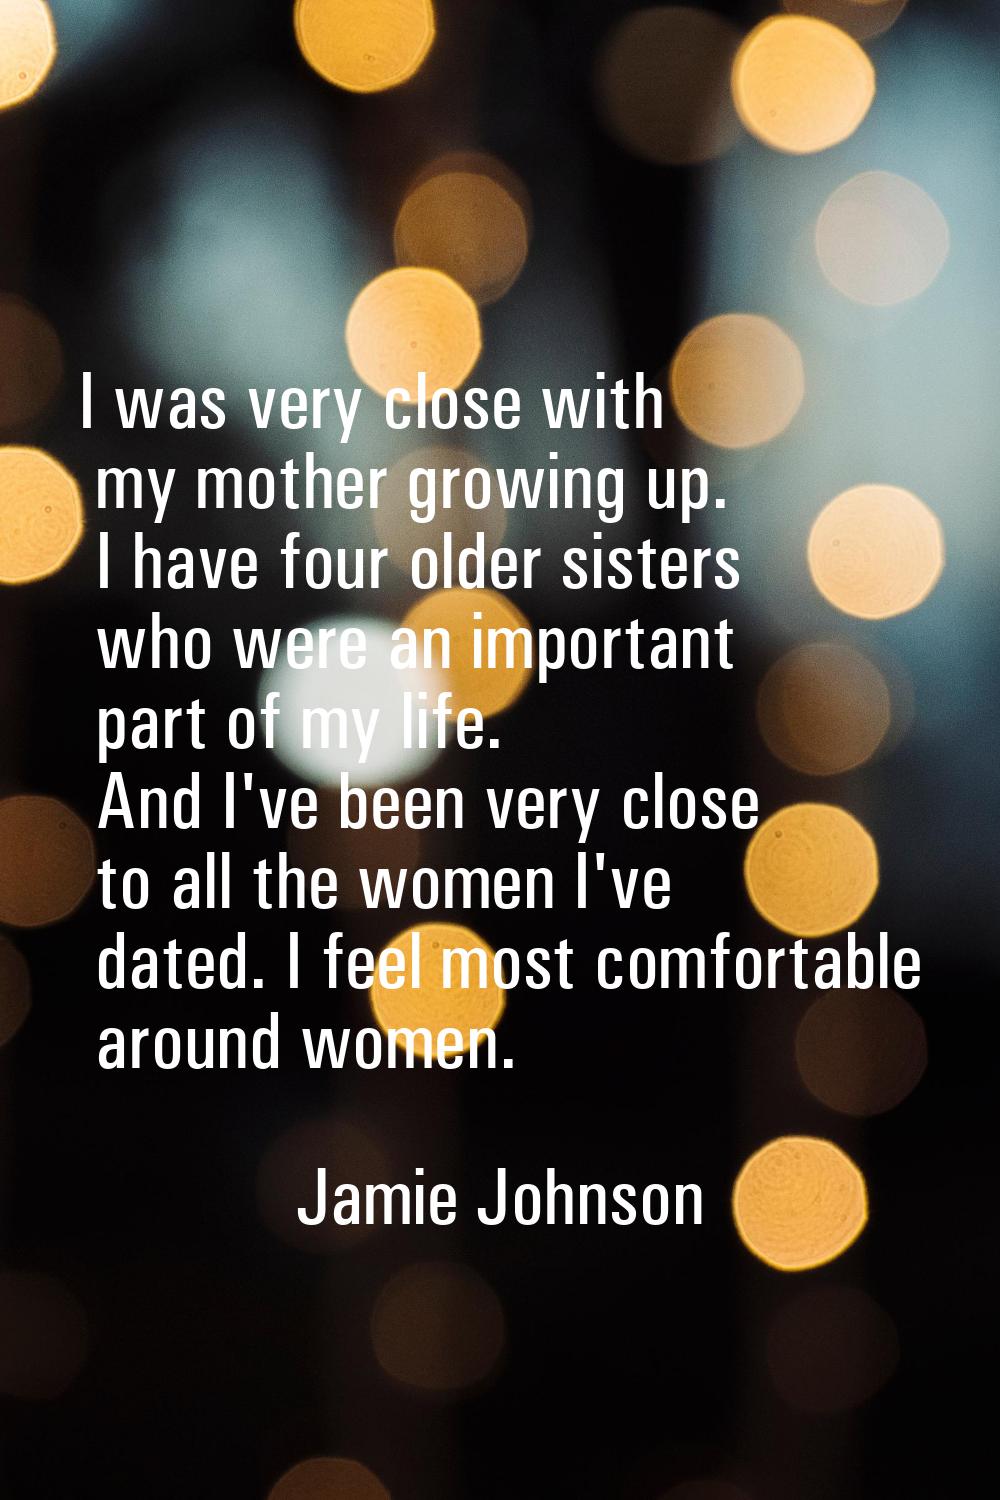 I was very close with my mother growing up. I have four older sisters who were an important part of